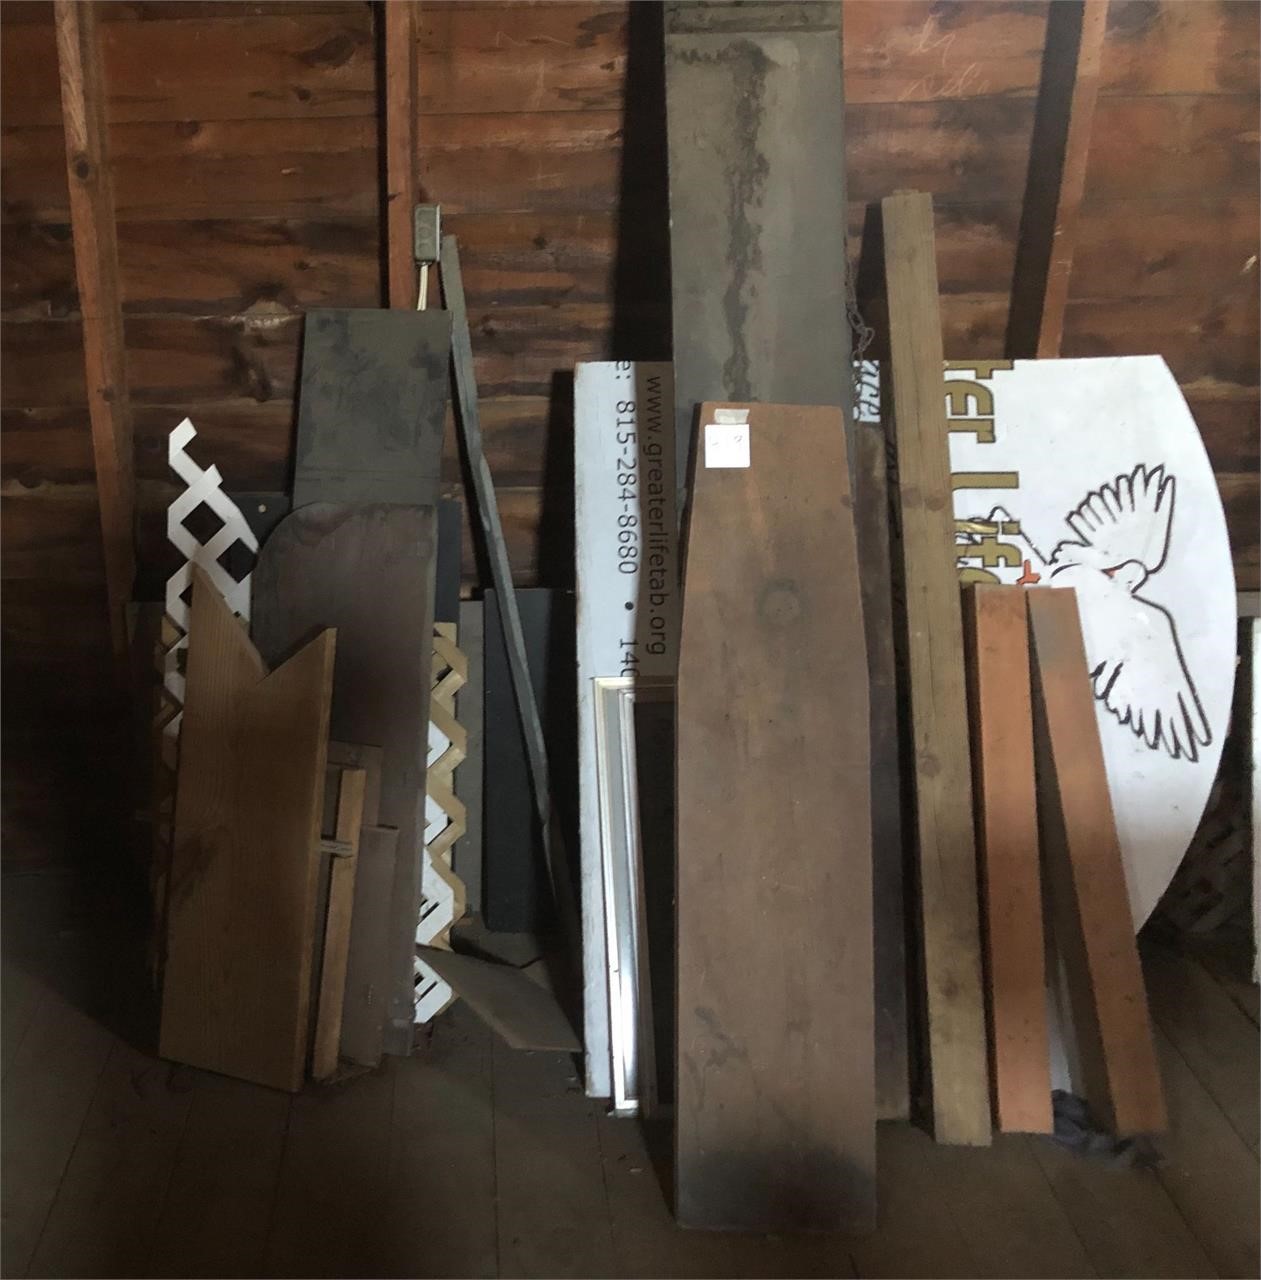 Miscellaneous Wood Pieces